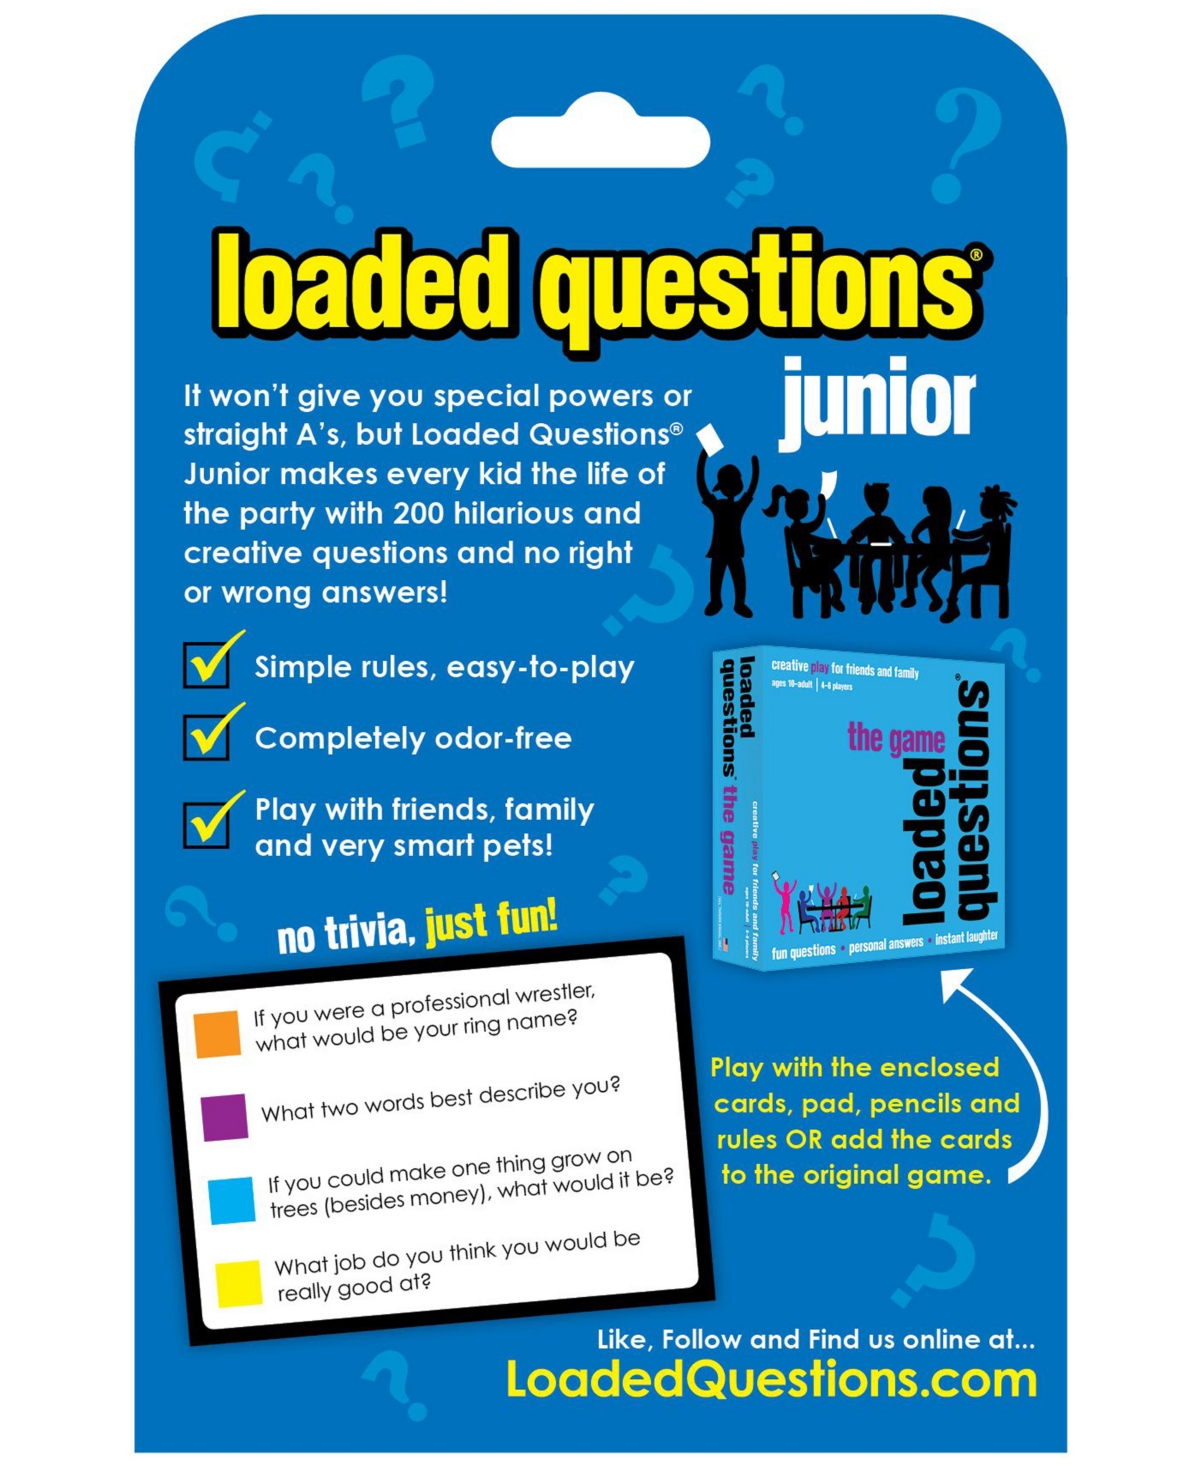 Shop All Things Equal Loaded Questions Junior In Multi